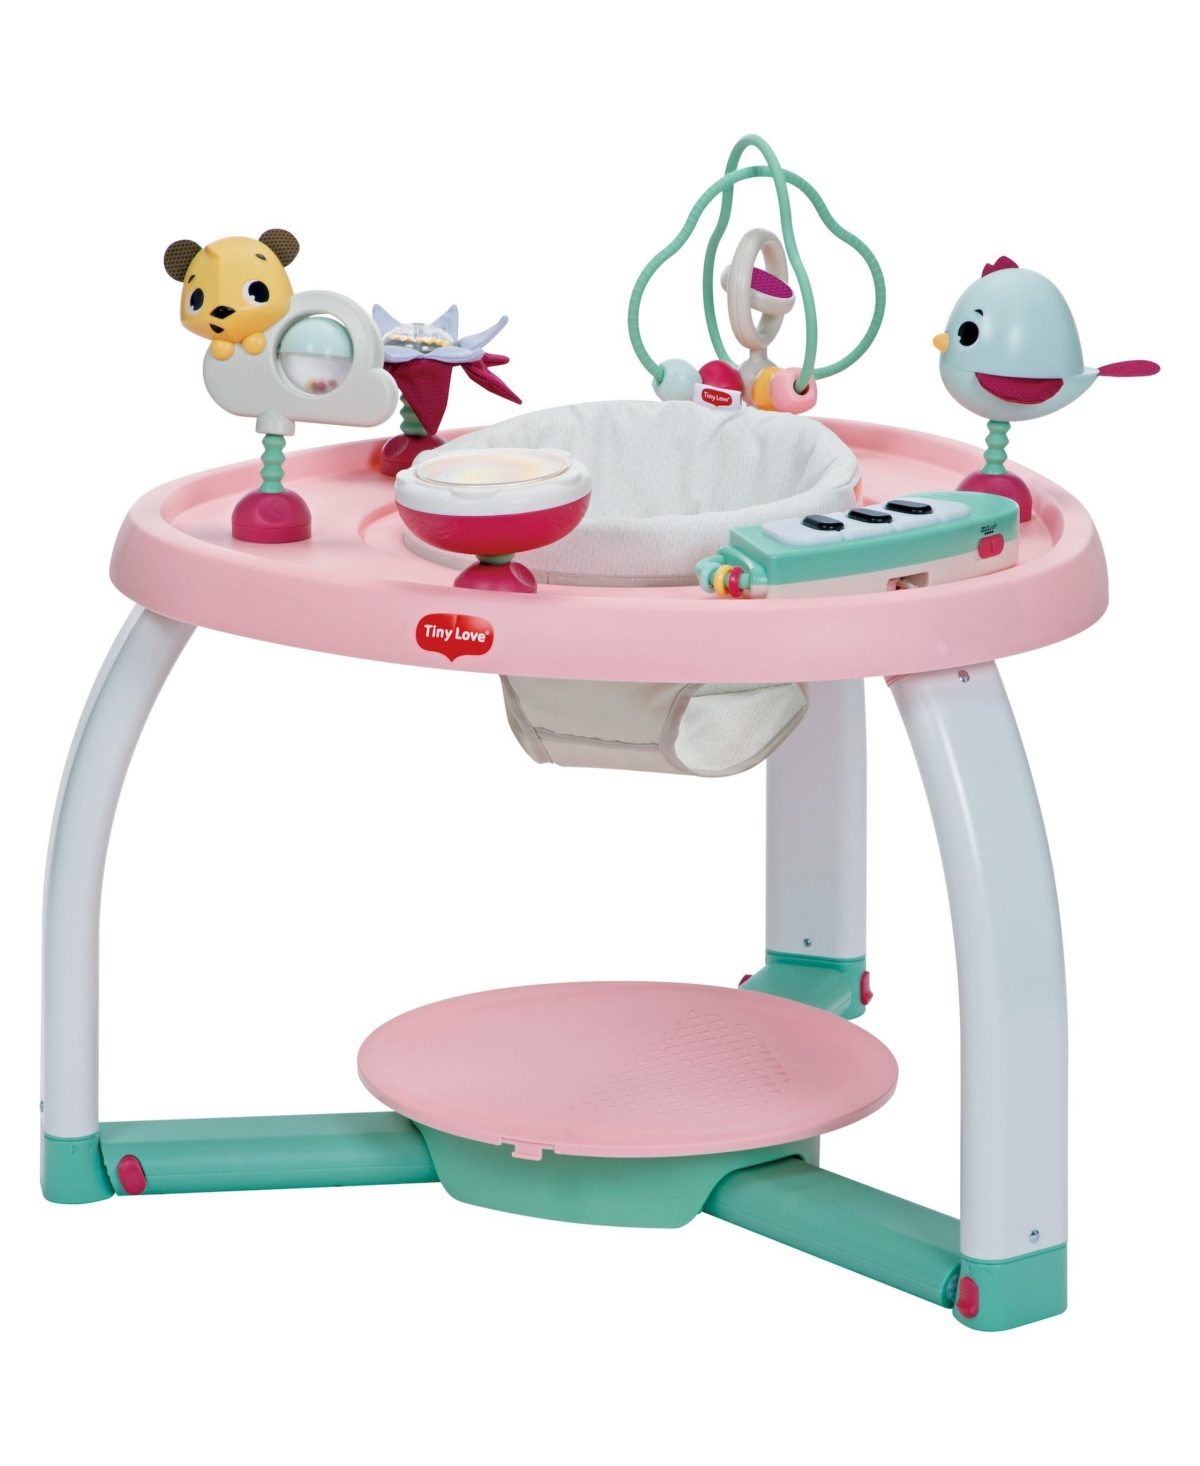 Tiny Love Infant And Toddler Tales Stationary Activity Center In Tiny Princess